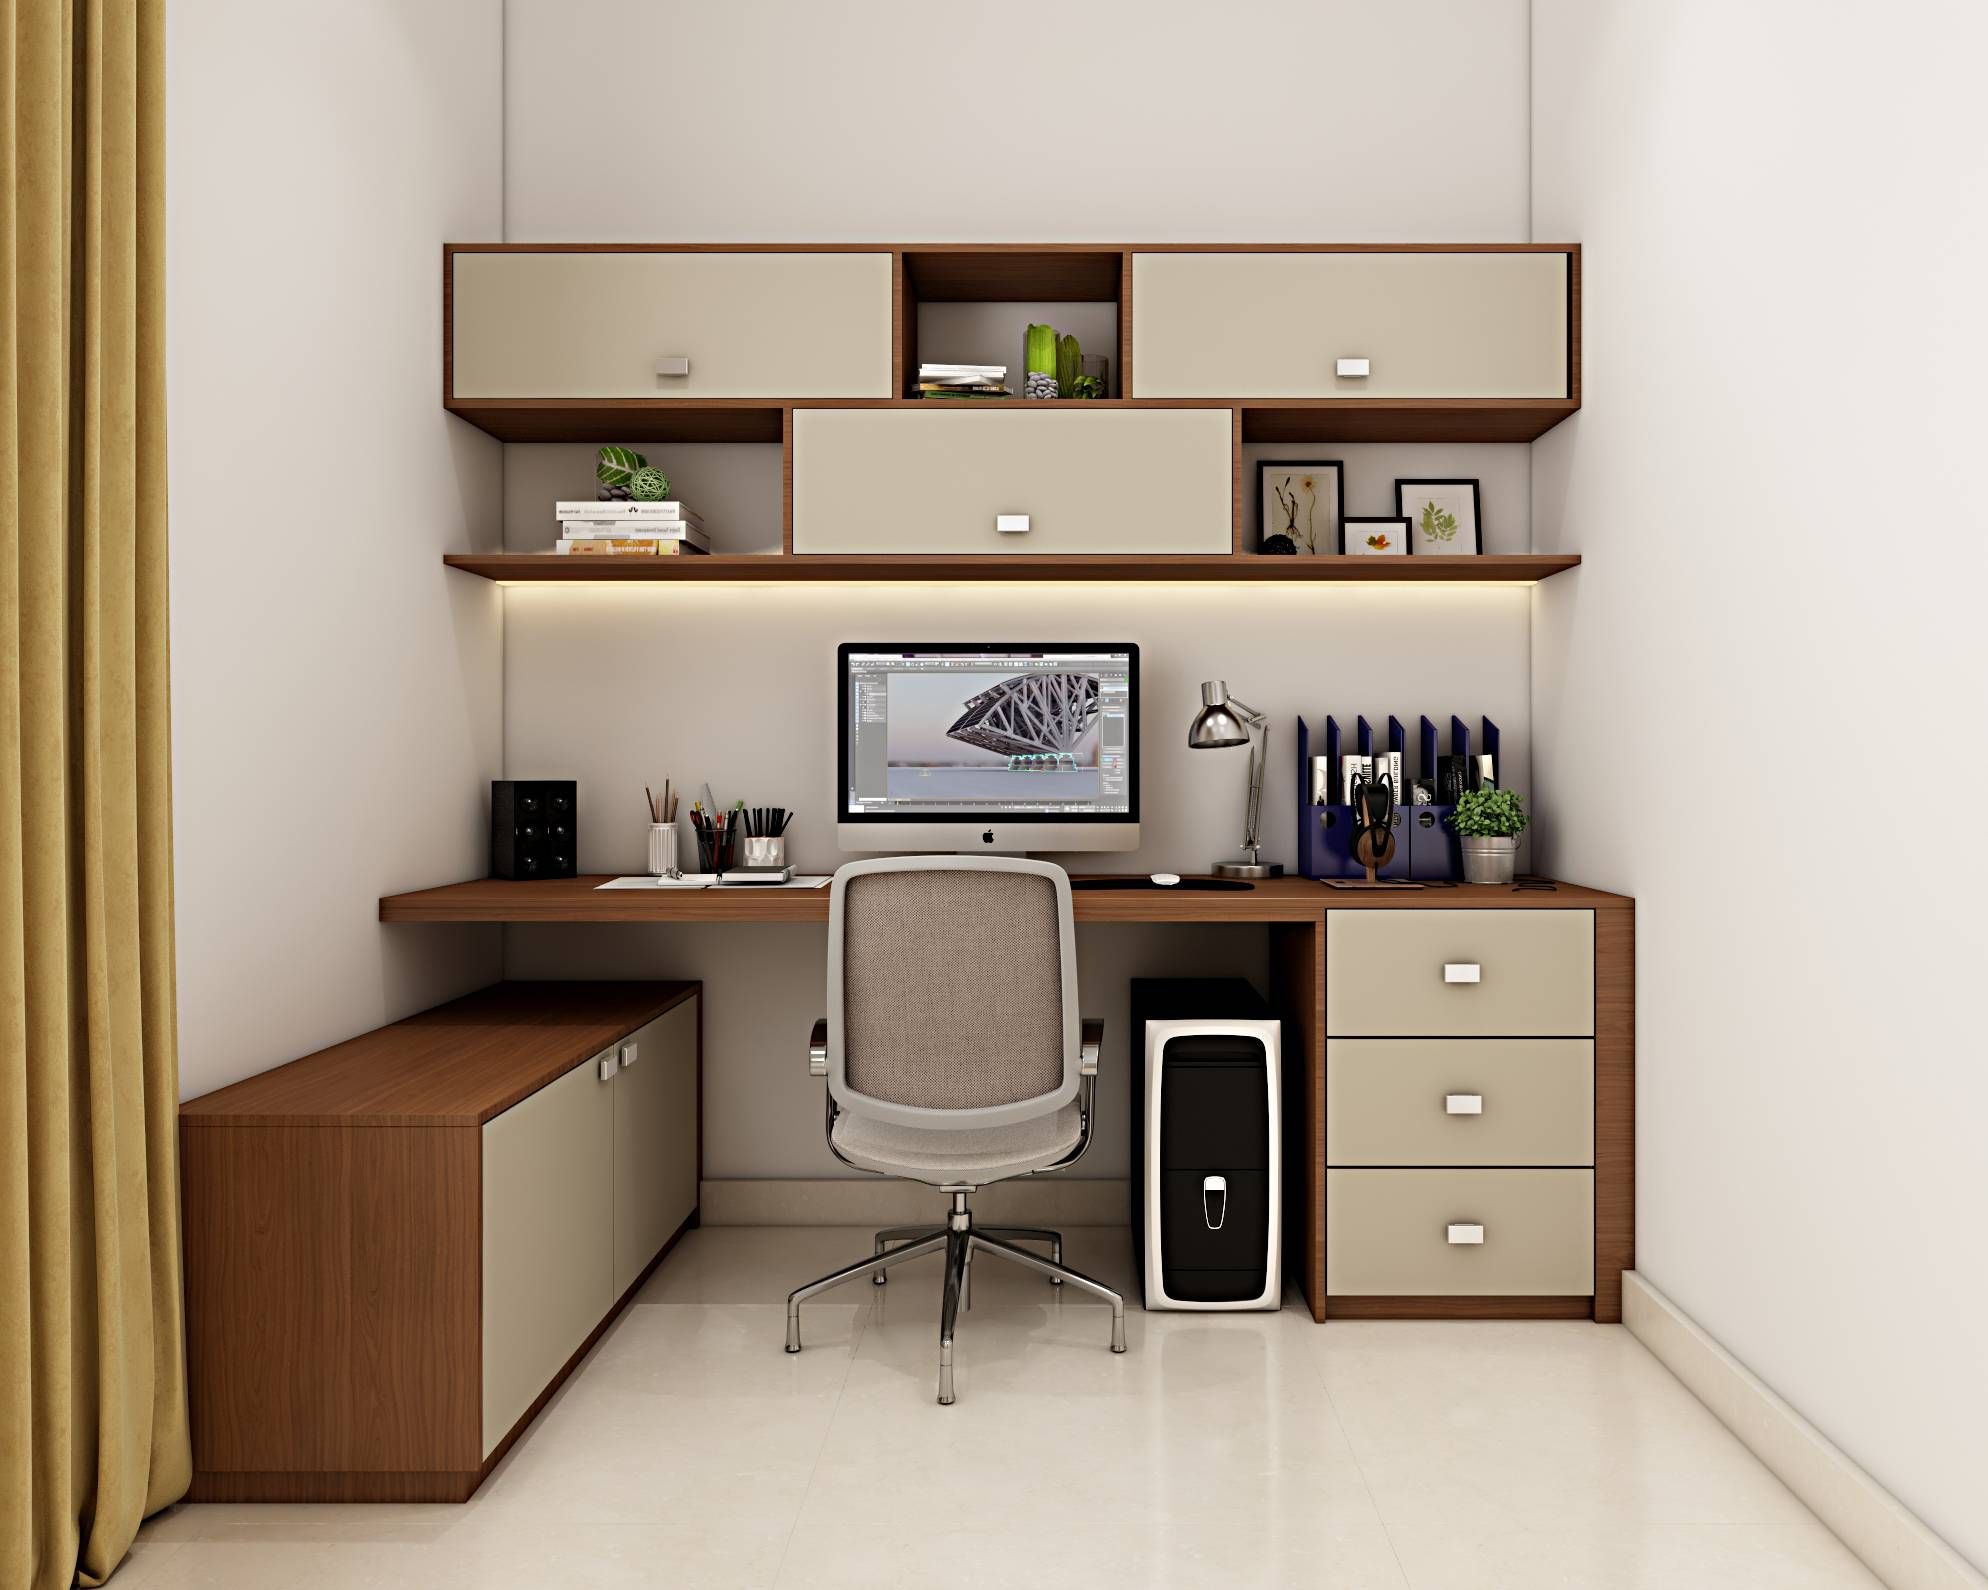 Modern Home Office Design With Wall-Mounted Study Unit